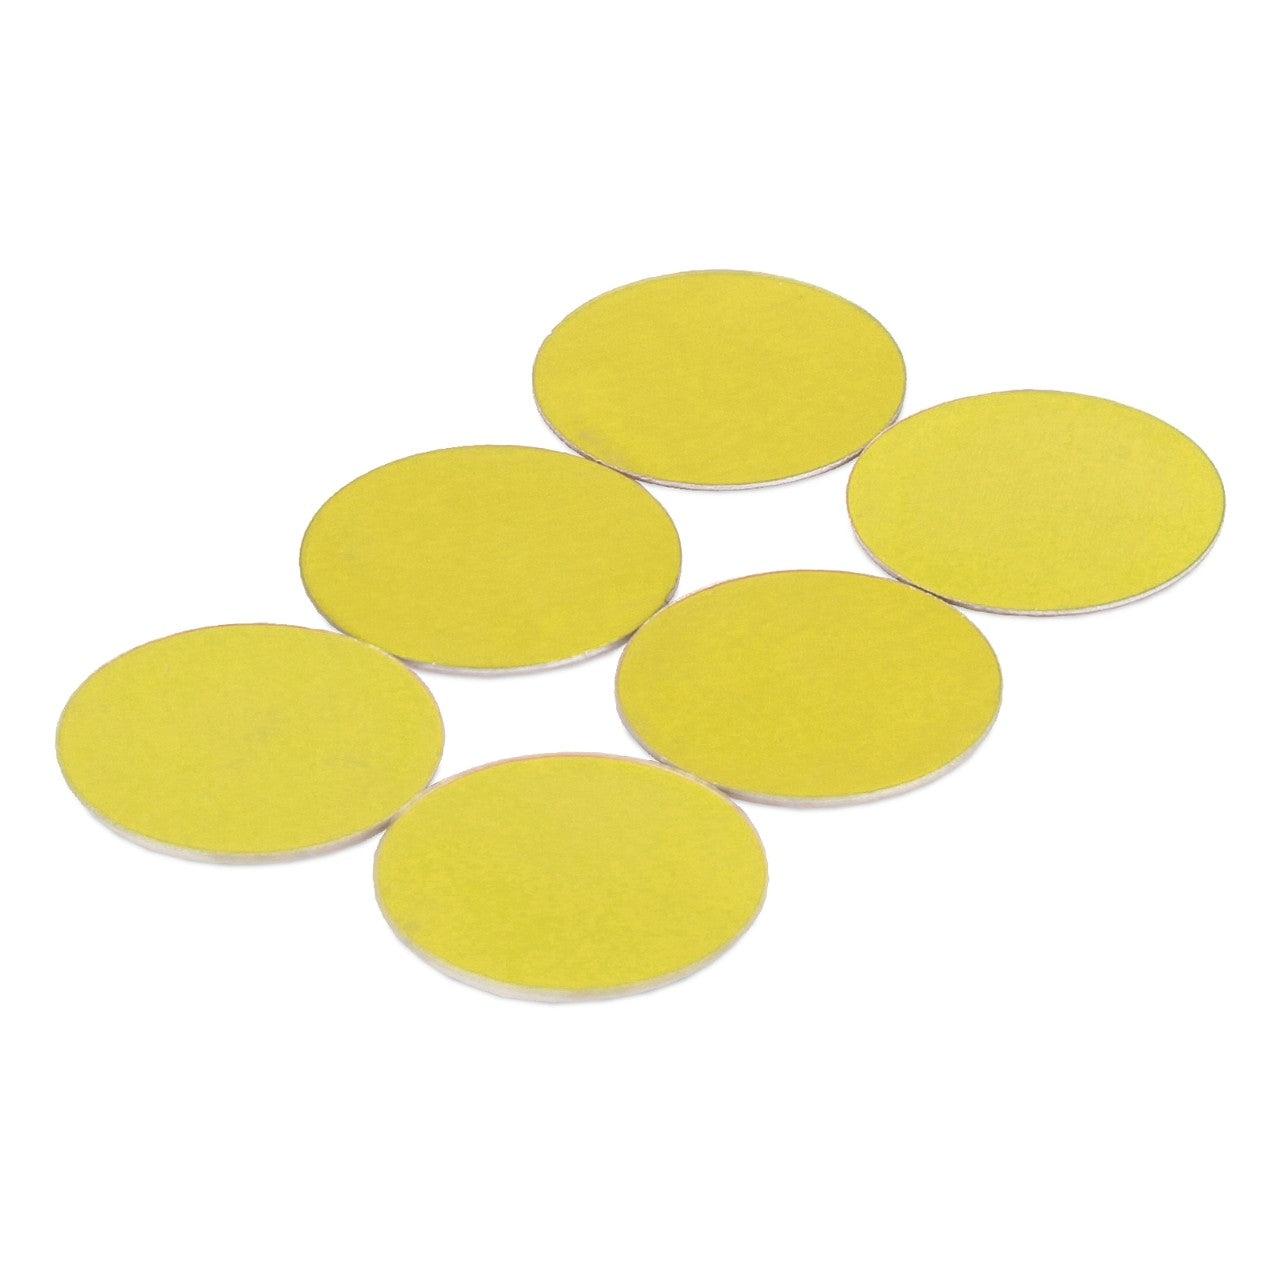 Blowout Disc Kit - (6) Yellow, 1450 psi, 11/16 in.